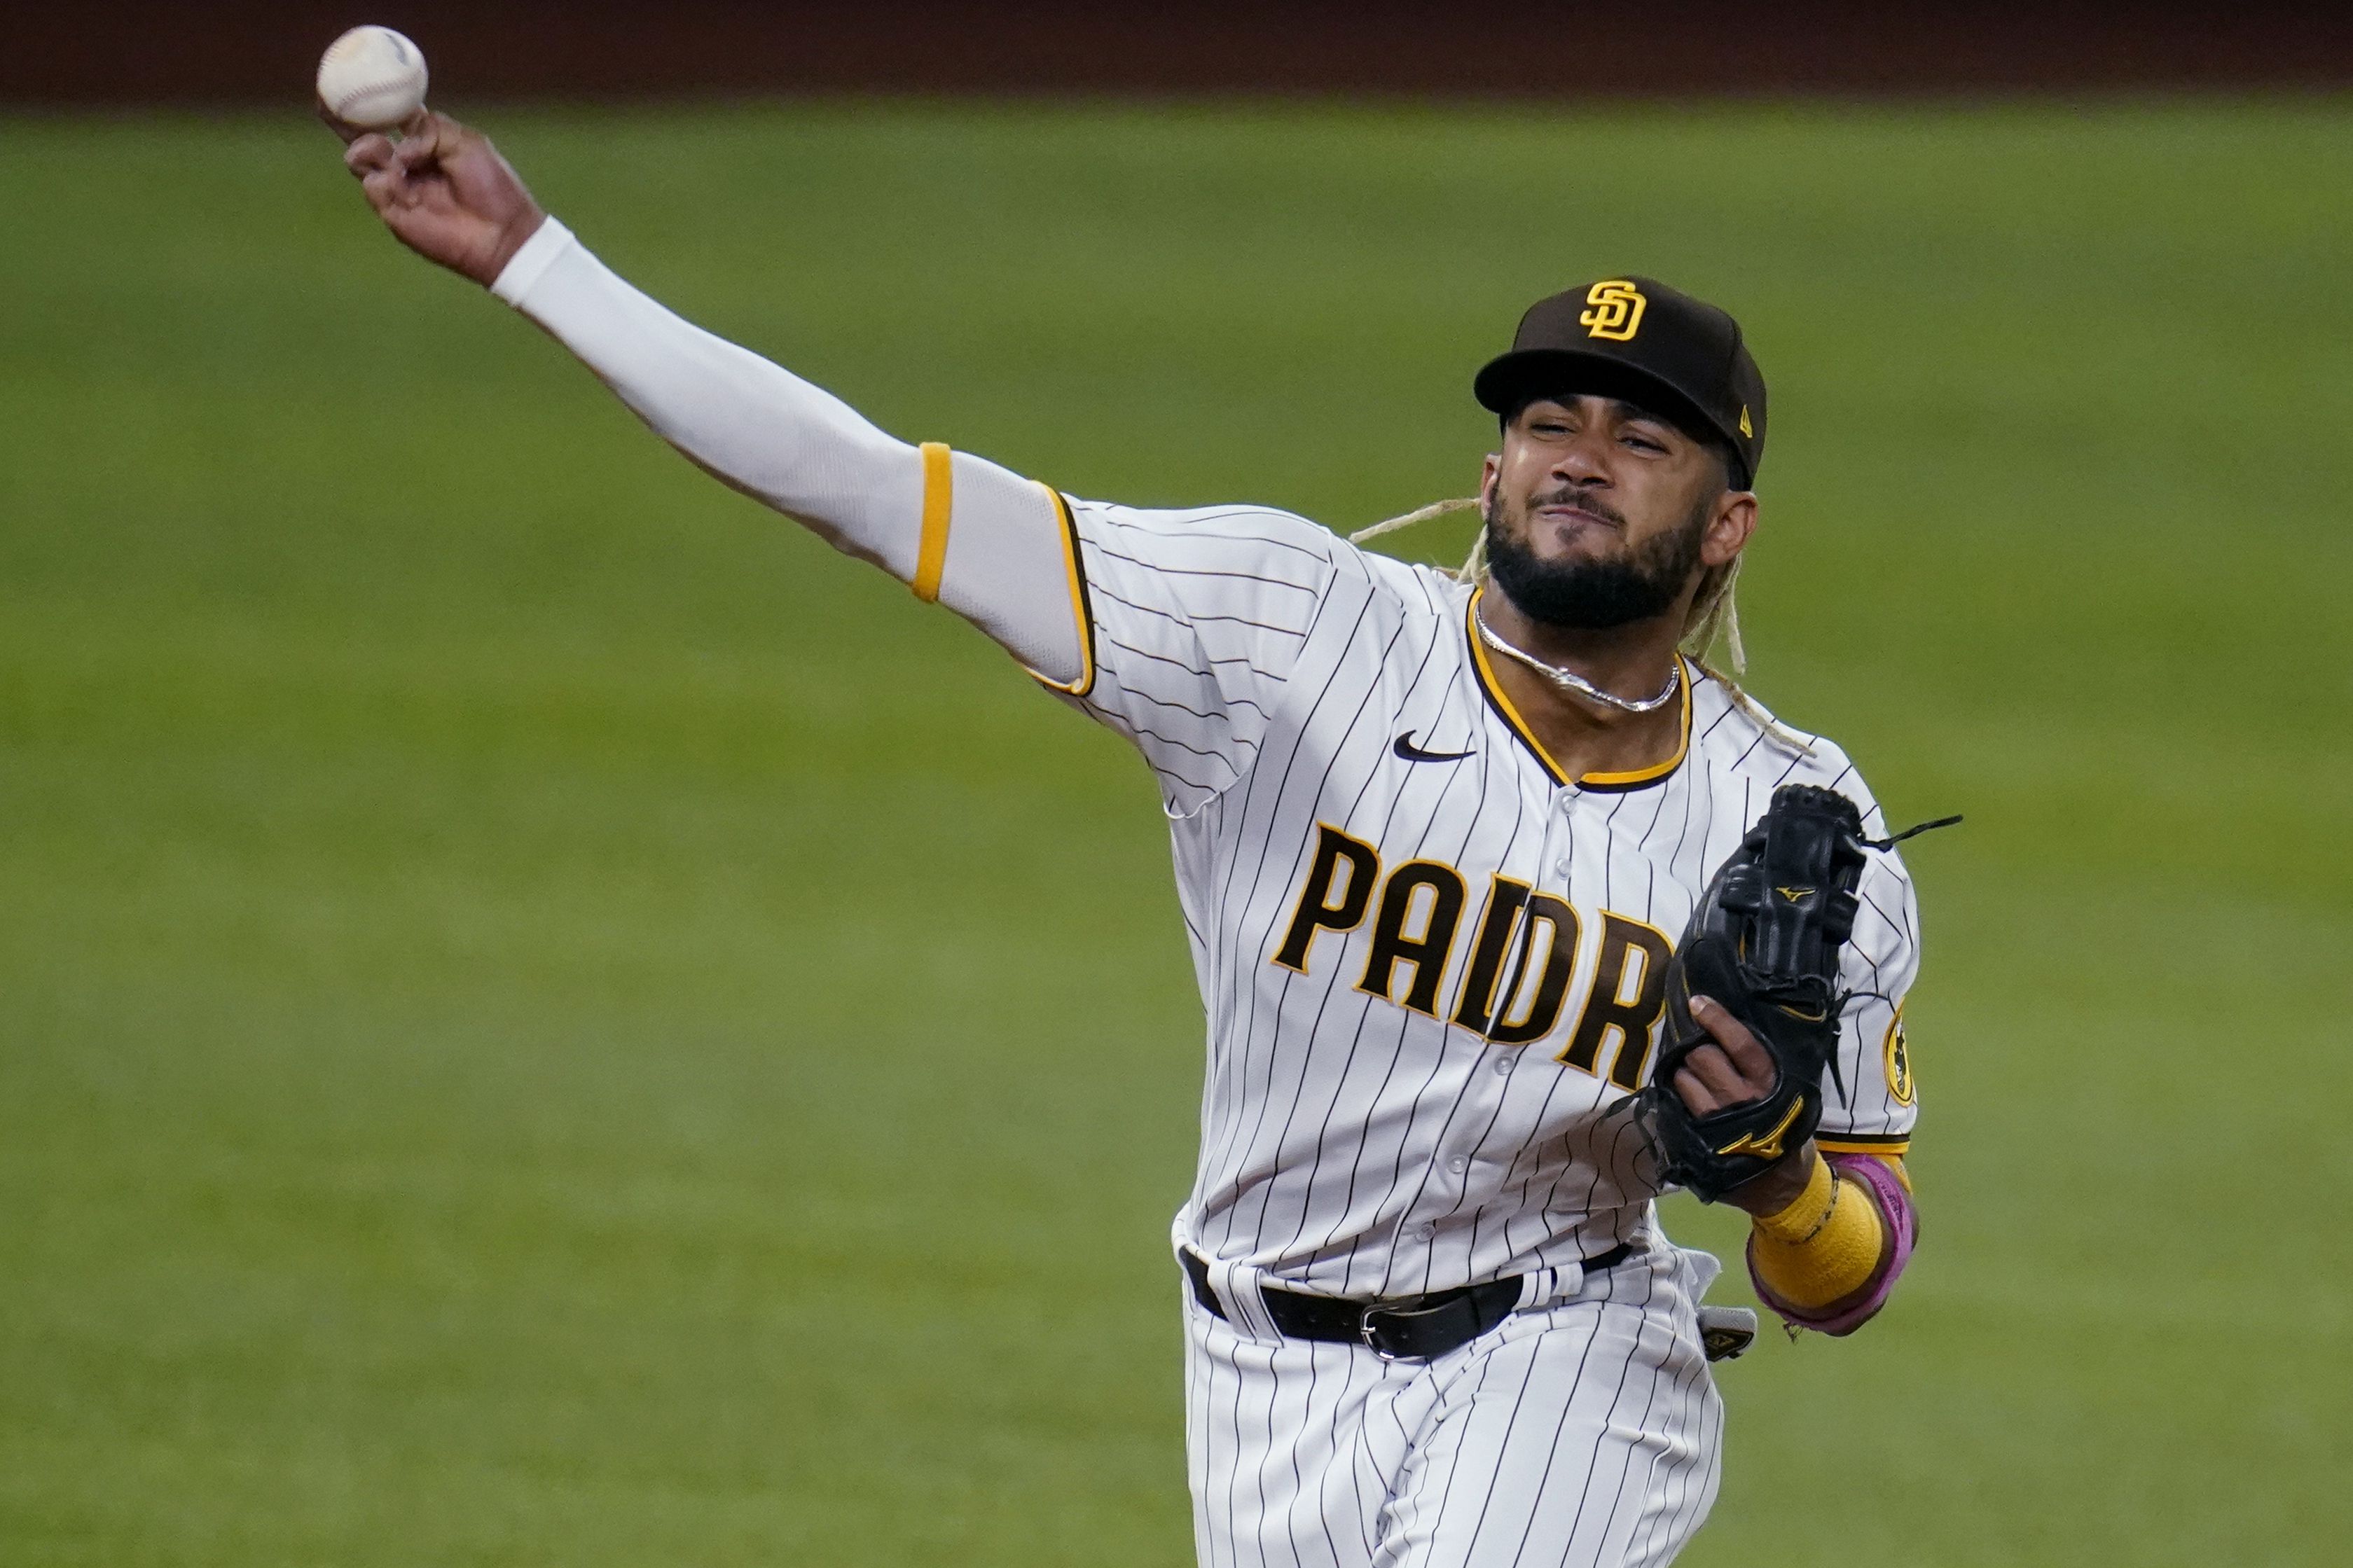 Padres' Fernando Tatis Jr breaks out dance moves to 'He's On